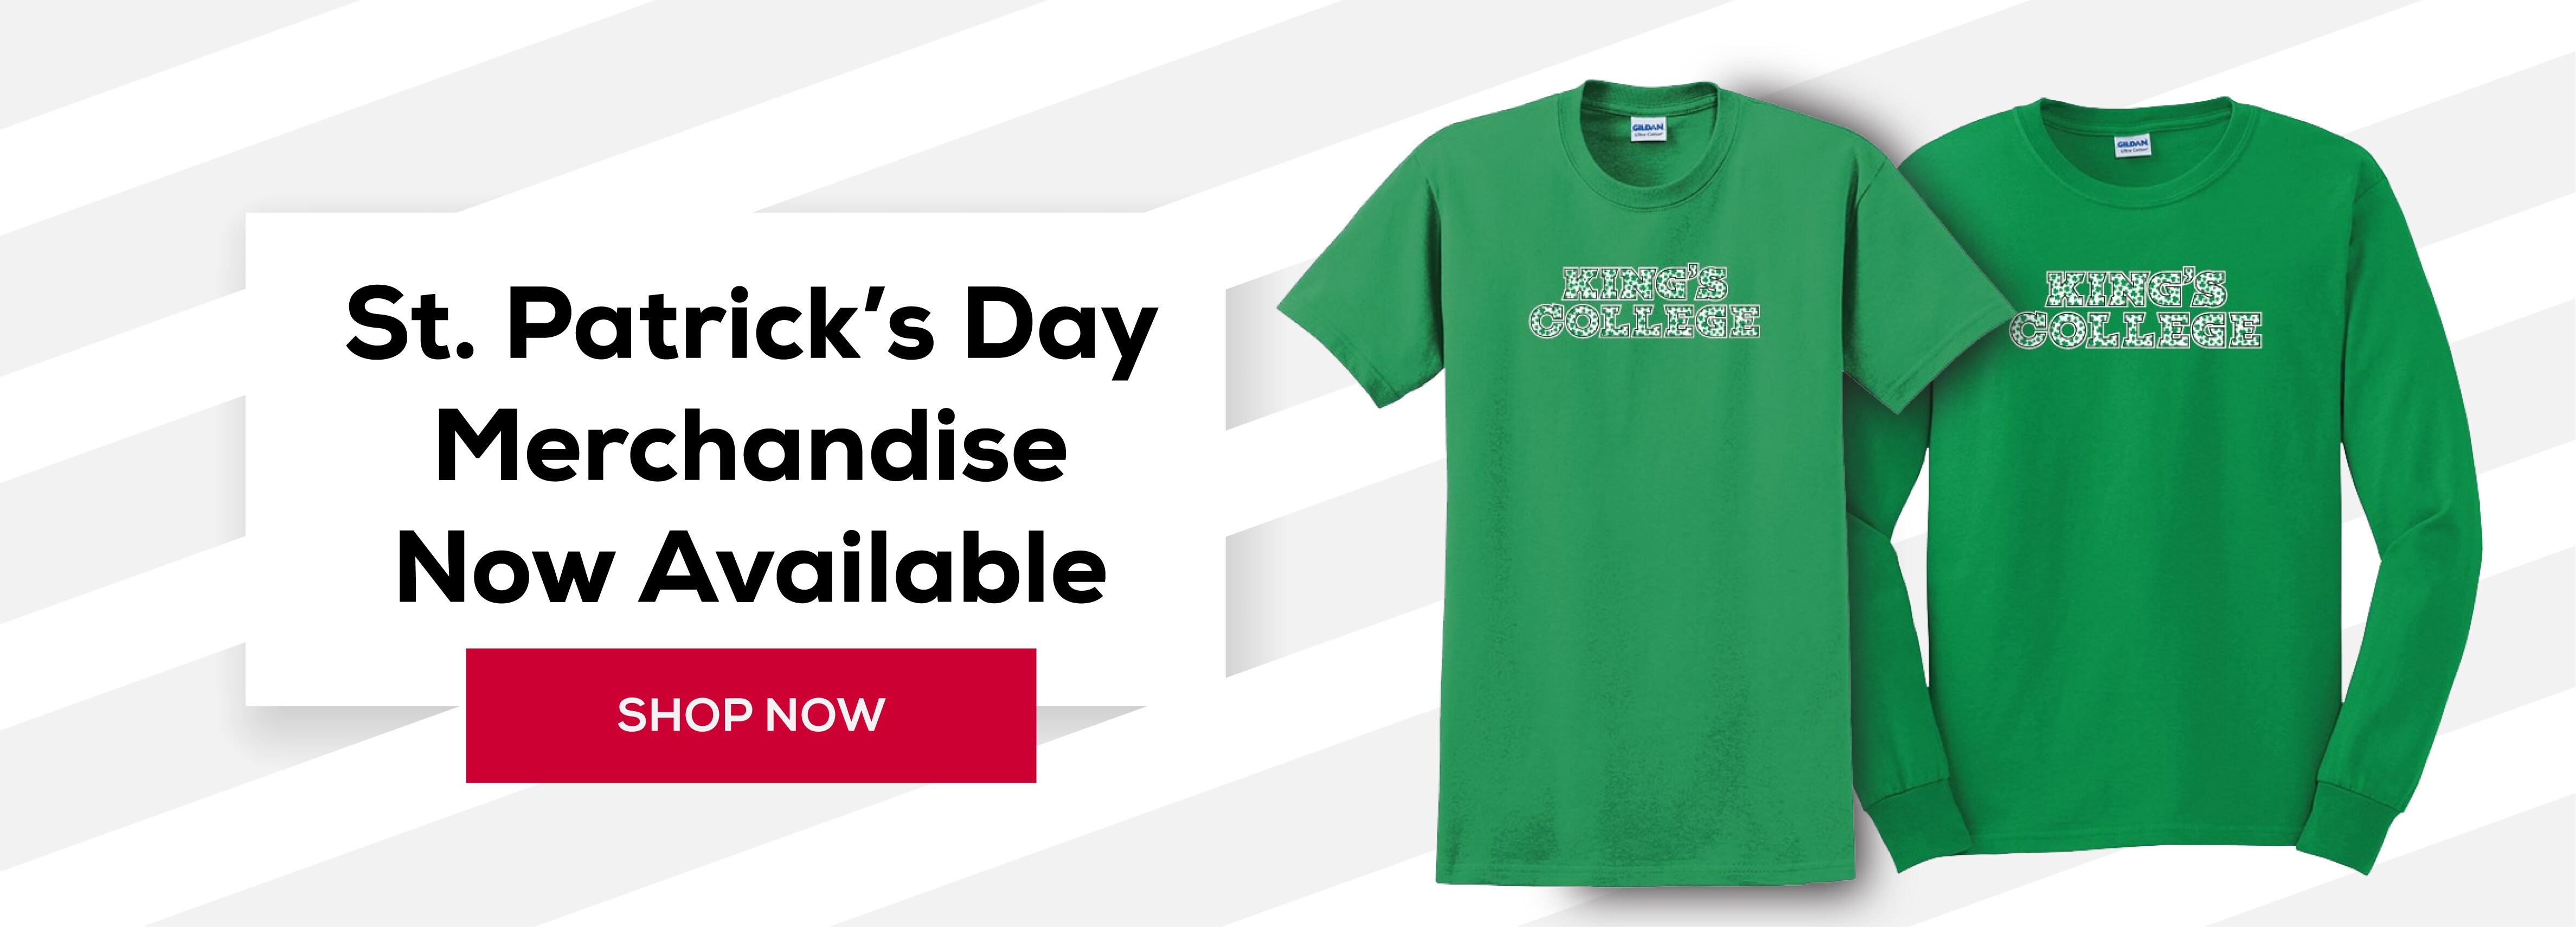 St. Patrick's Day Merchandise Now Available! Shop Now